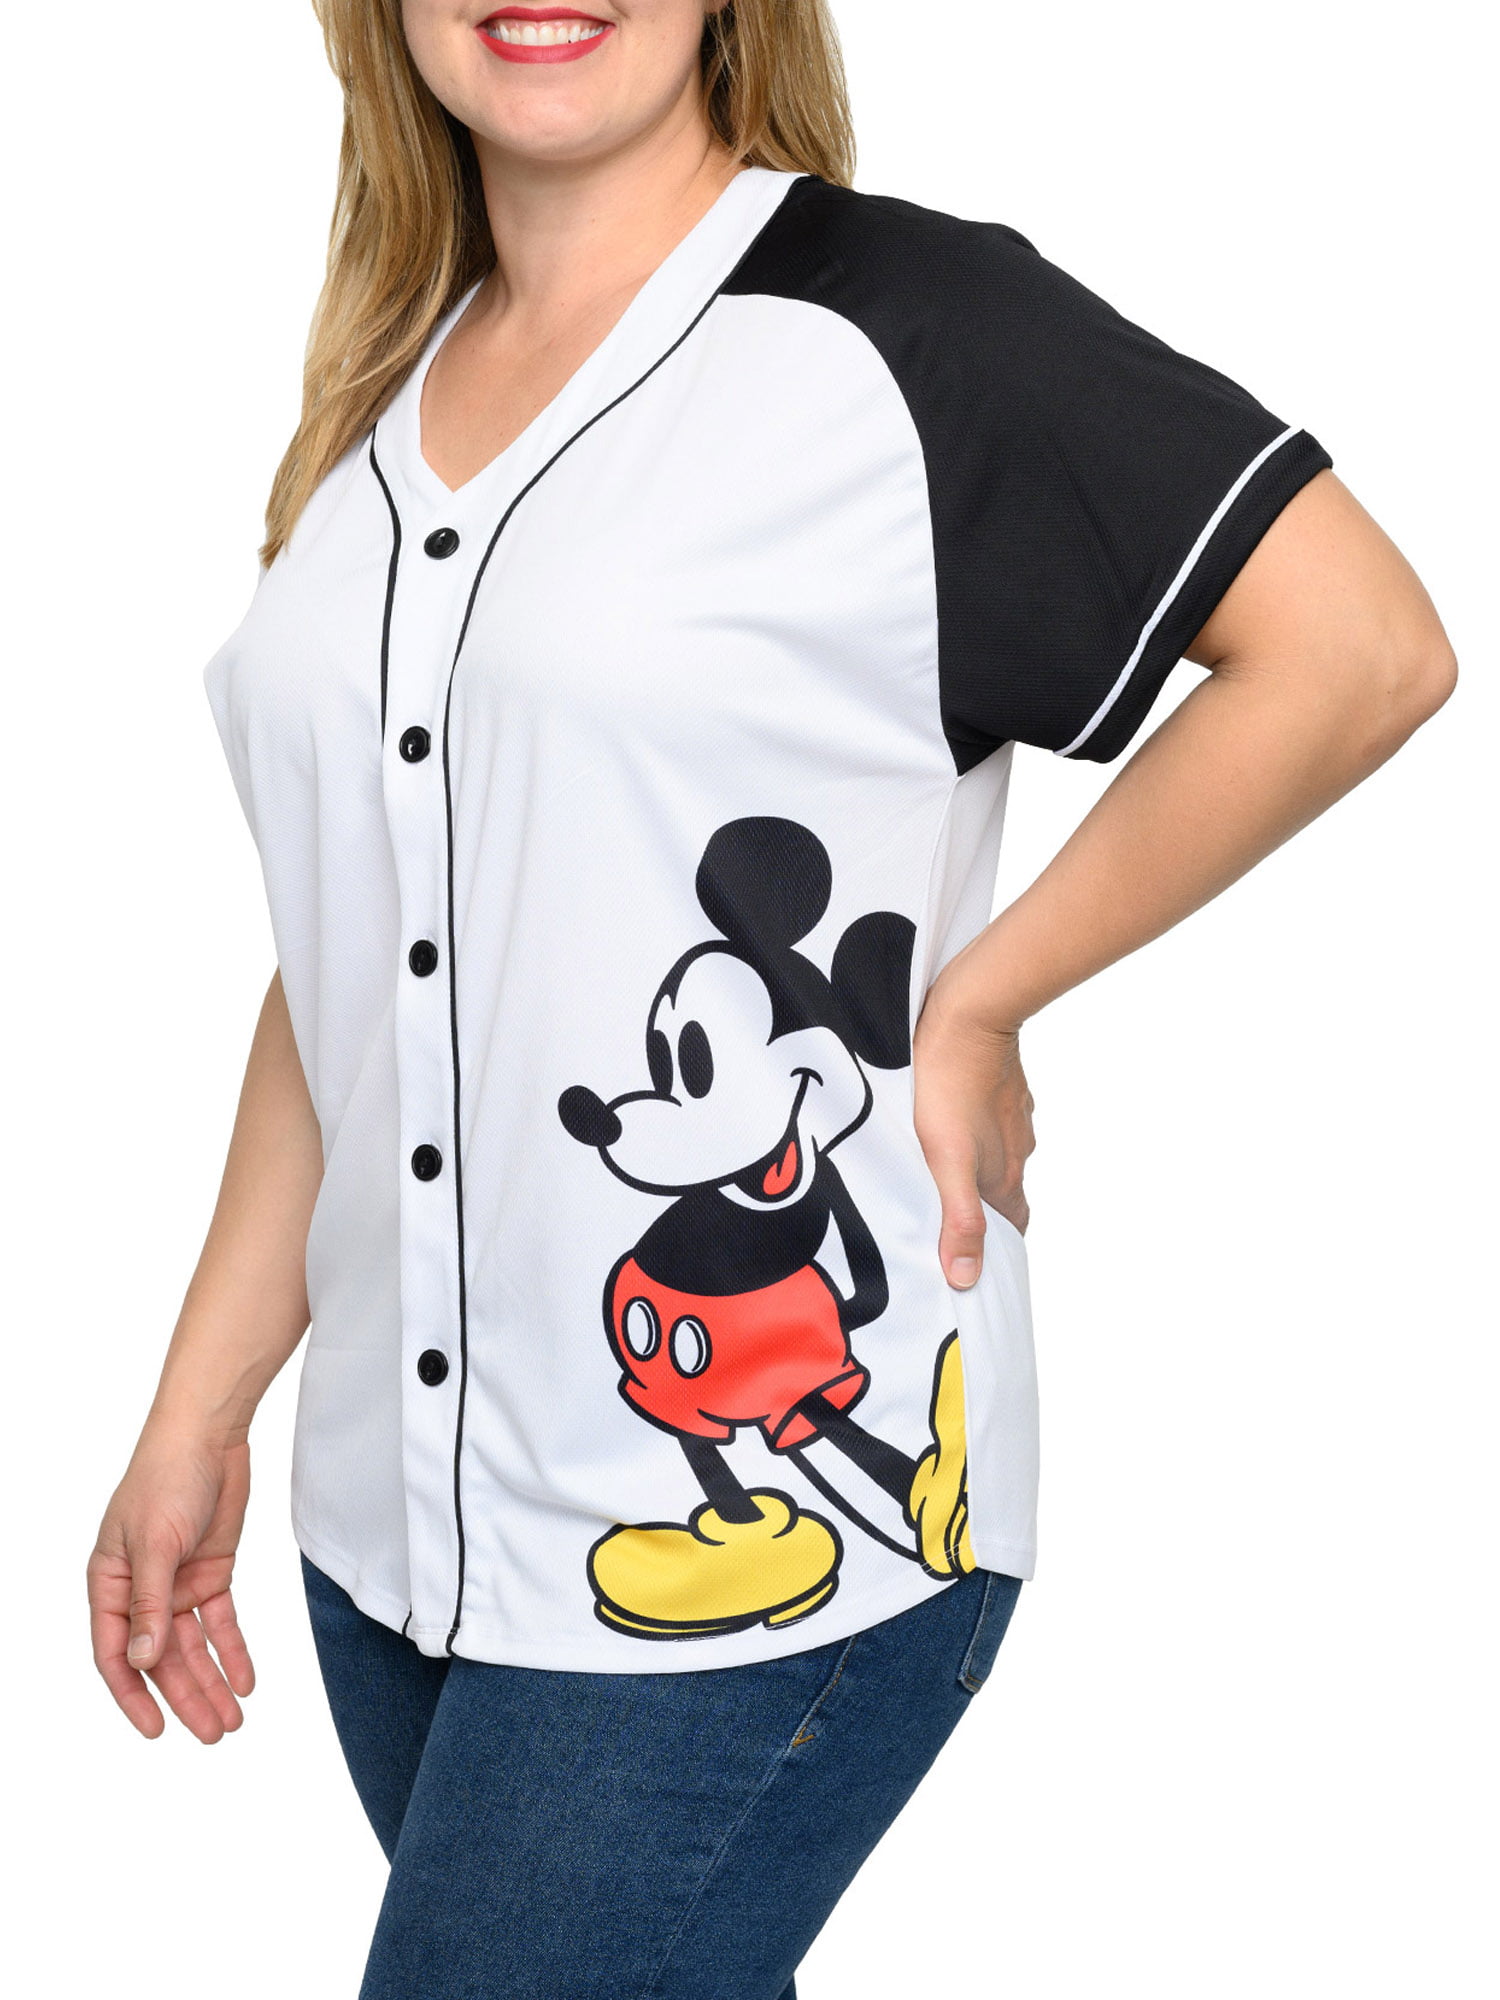 Mickey Mouse Cartoon Lovers AOP 3D BASEBALL JERSEY SHIRT All Over Print US  Size